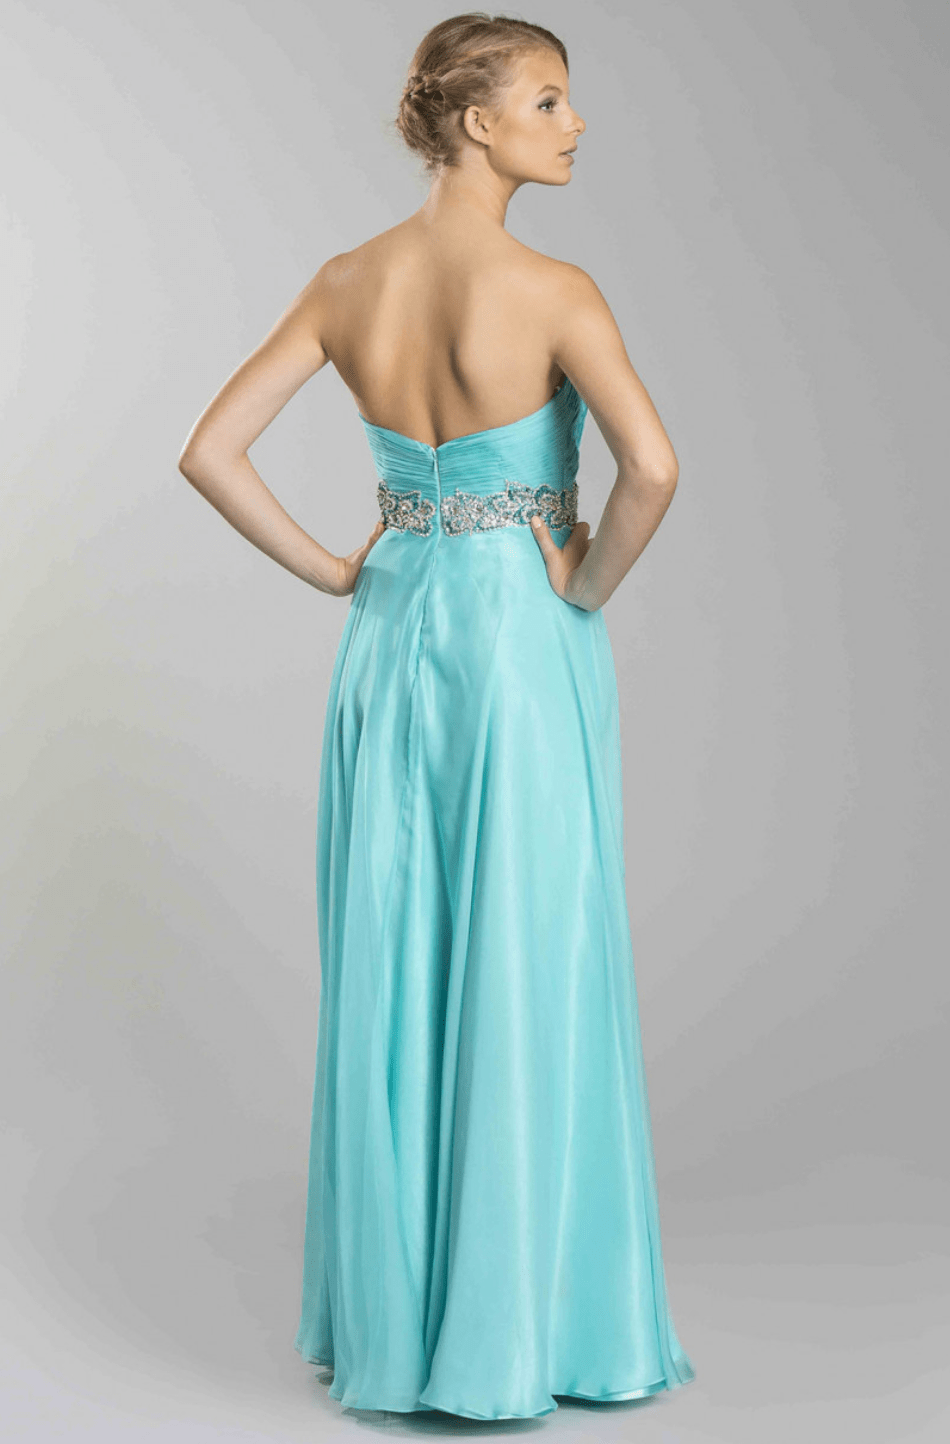 Strapless Beaded Chiffon Dress by Aspeed - NORMA REED